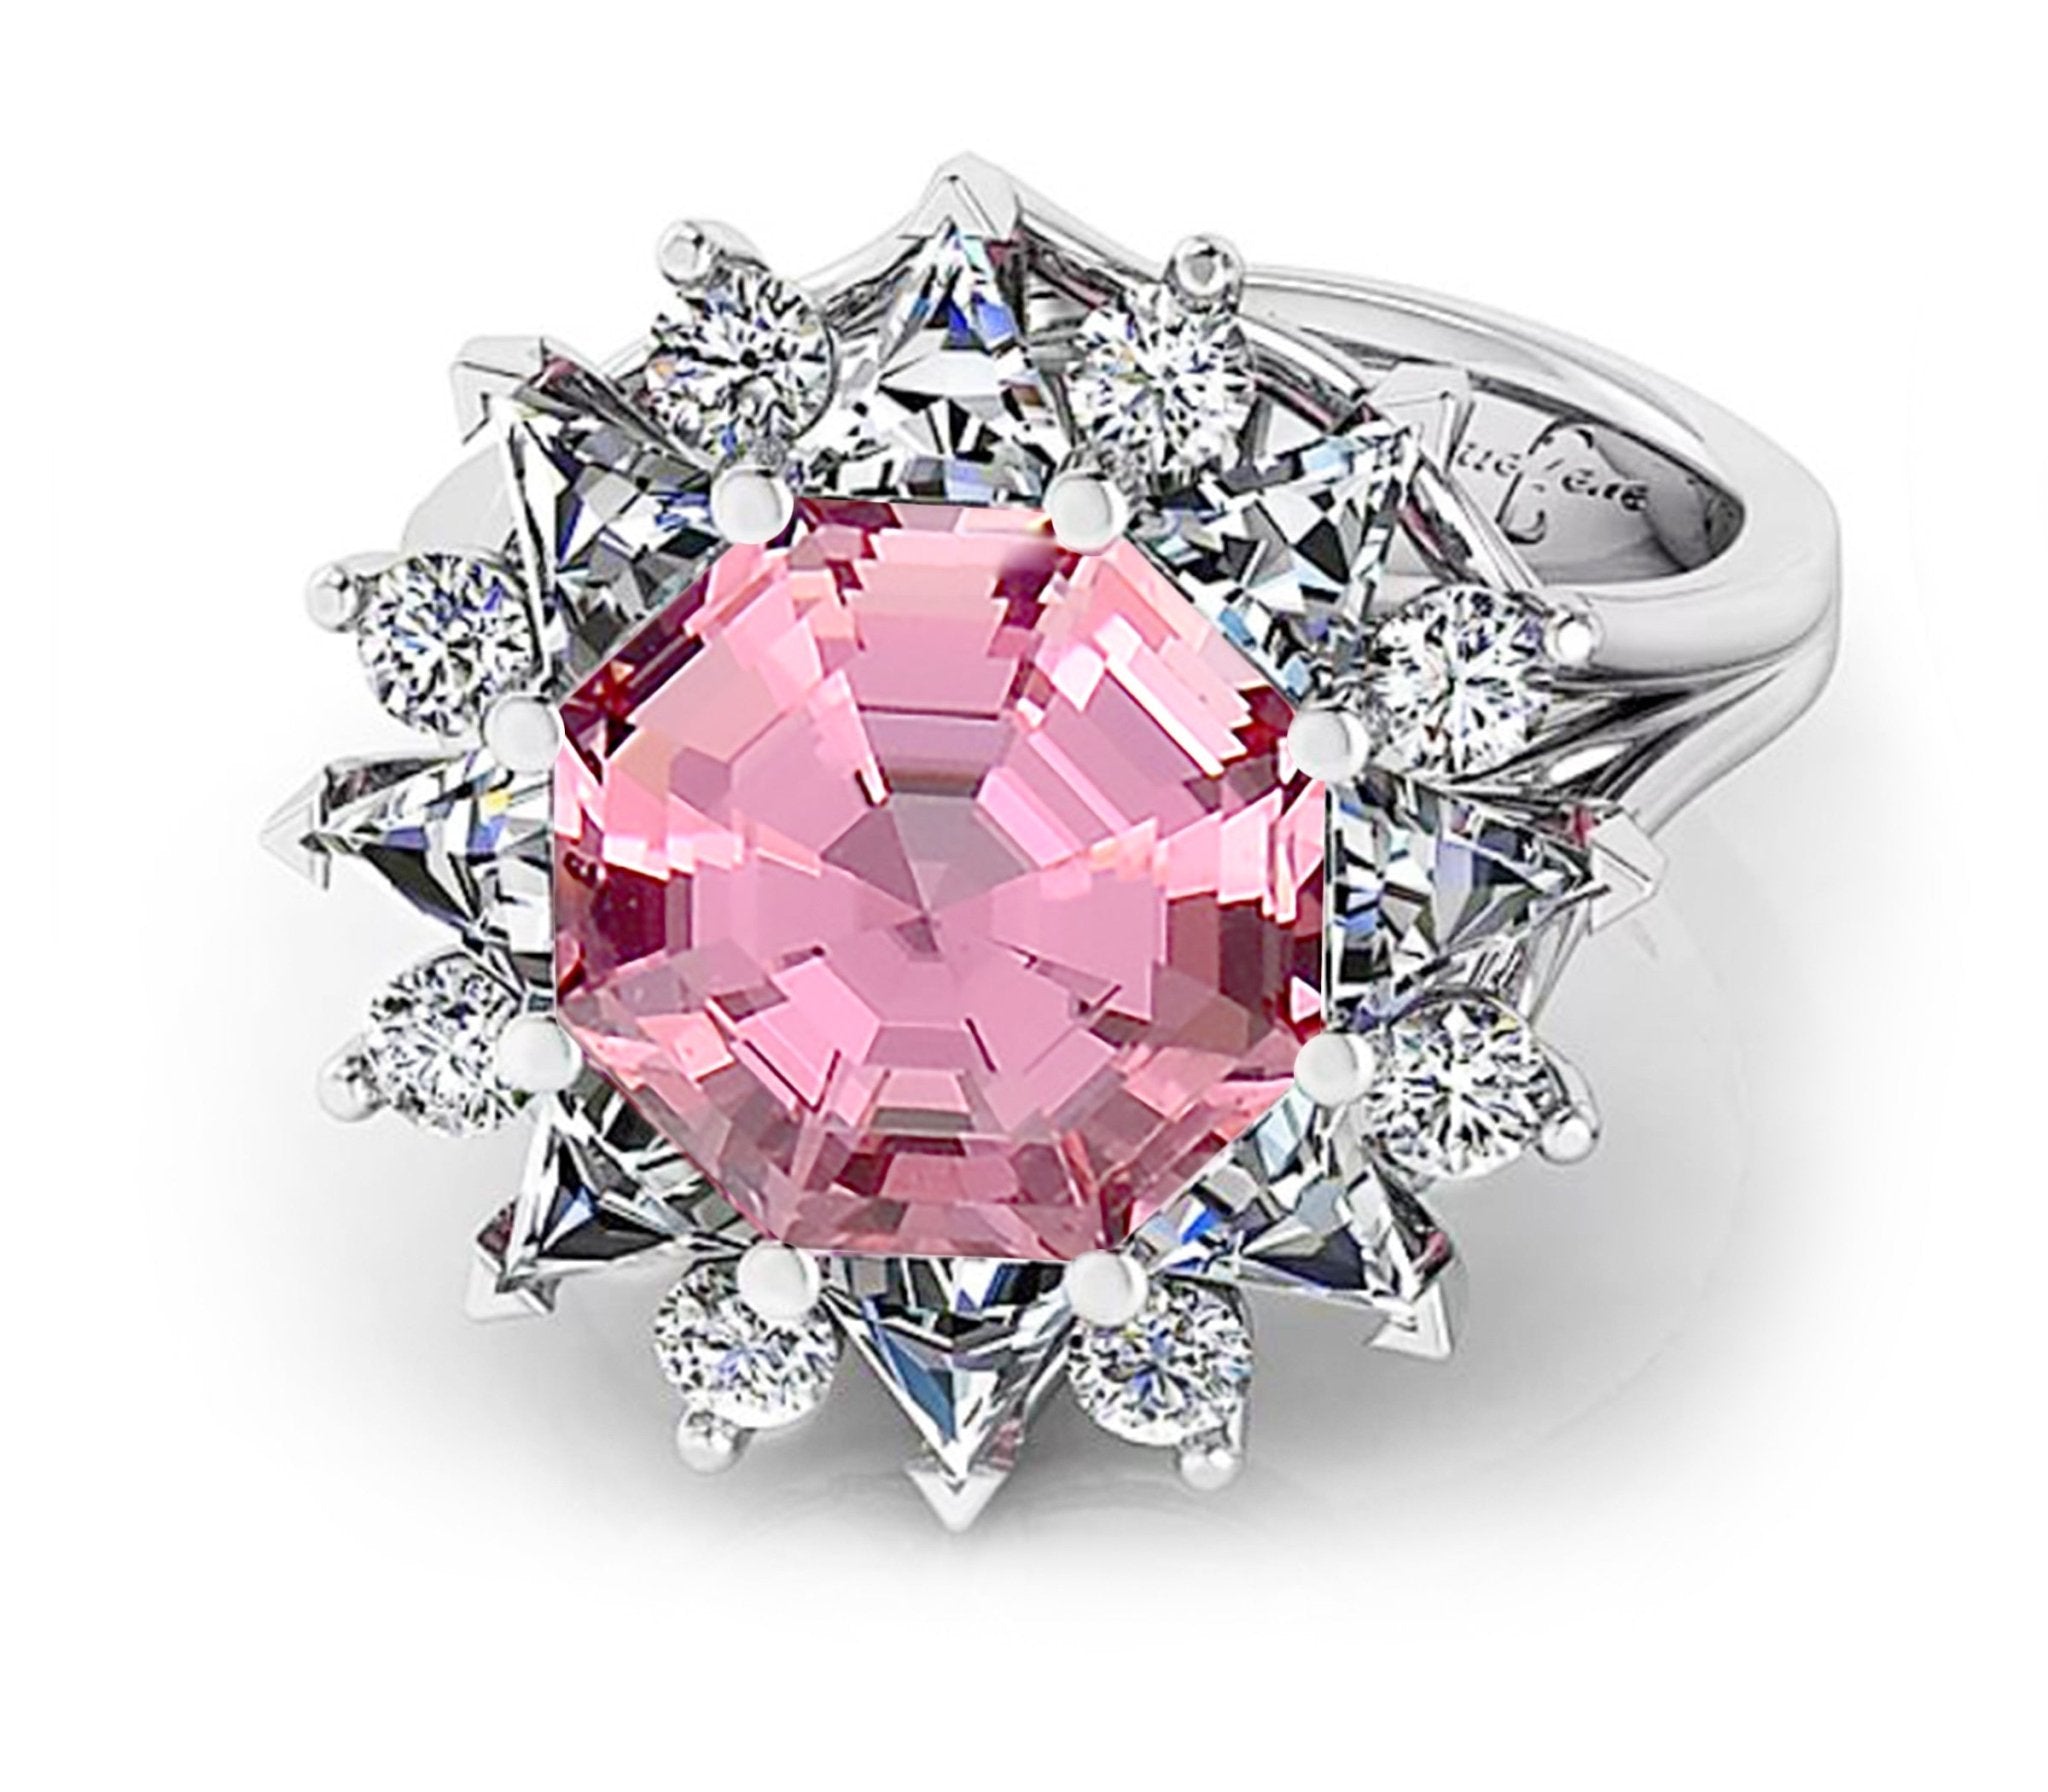 Pink Tourmaline Ring with a Halo of Diamonds - ForeverJewels Design Studio 8